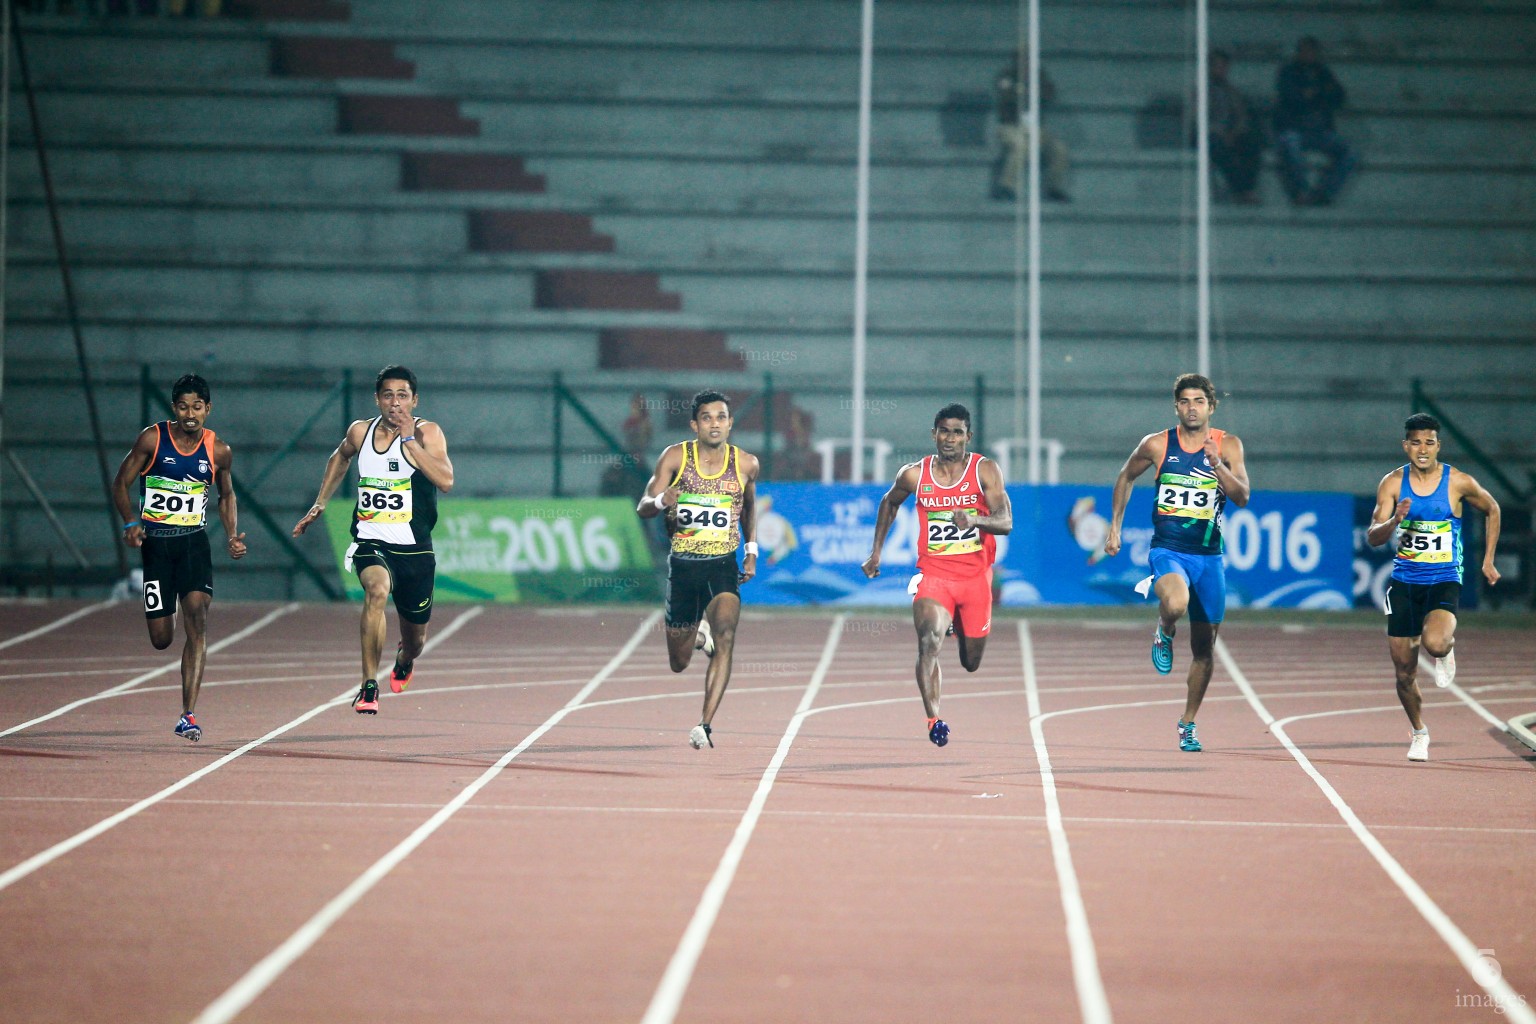 Hassan Saaid runs in the 200m finals in the South Asian Games in Guwahati, India, Thursday, February. 11, 2016. (Images.mv Photo/ Mohamed Ahsan).